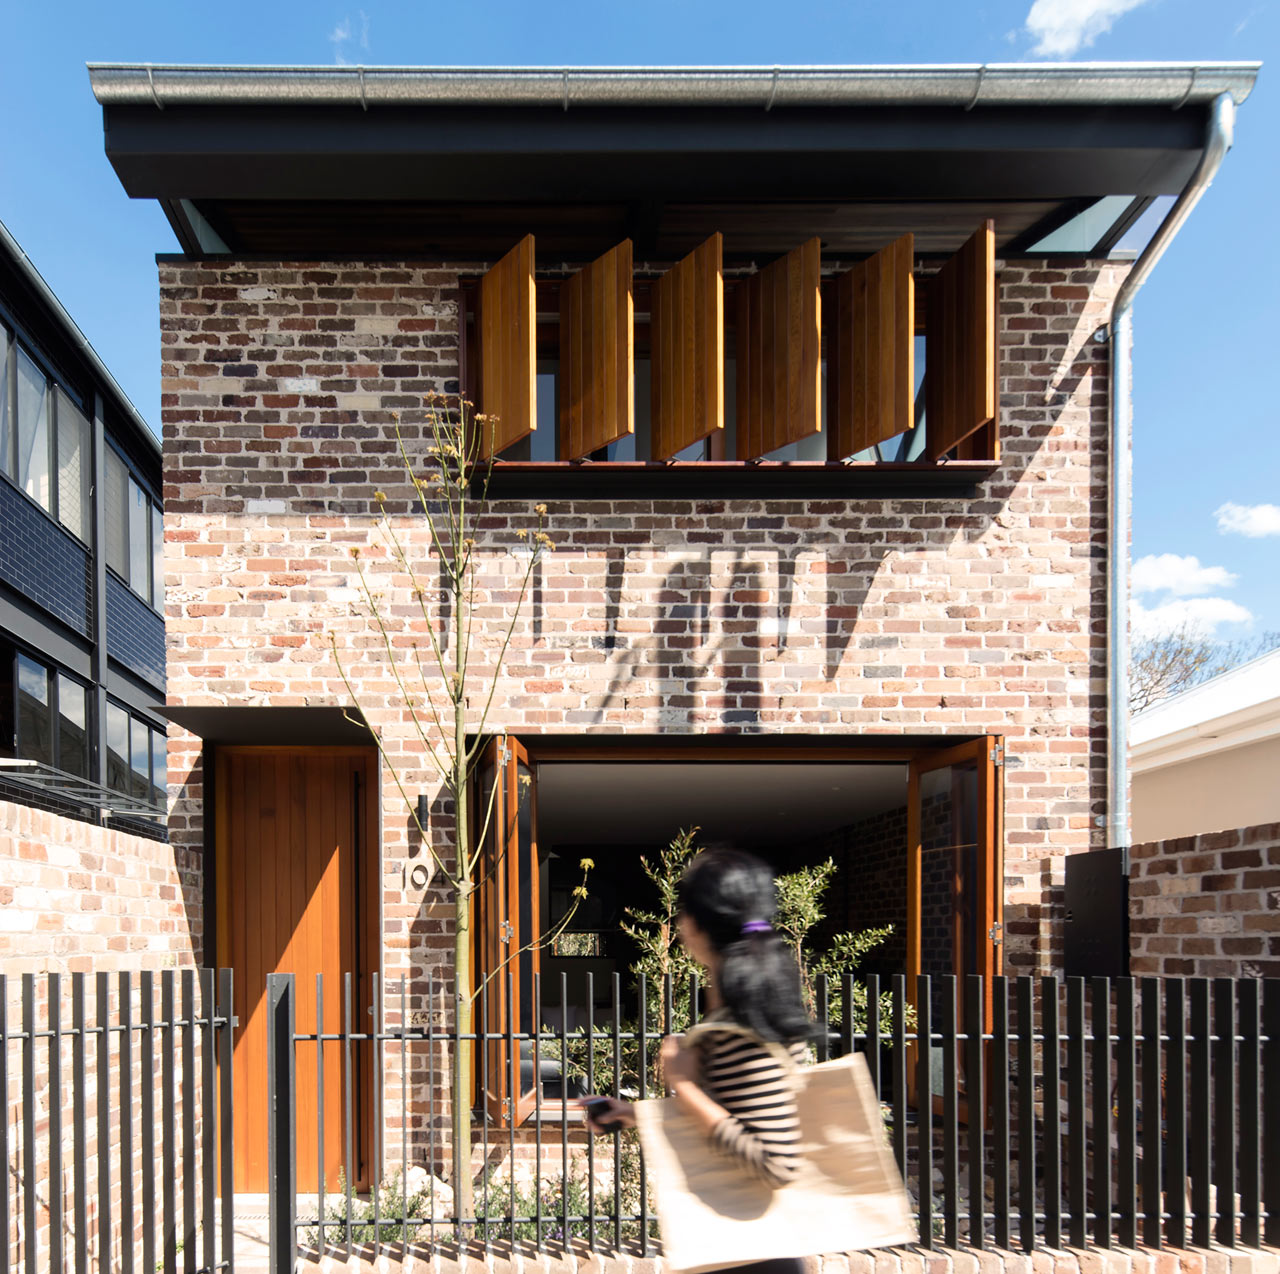 A Sydney House with an Industrial Past Incorporates Some of those Elements